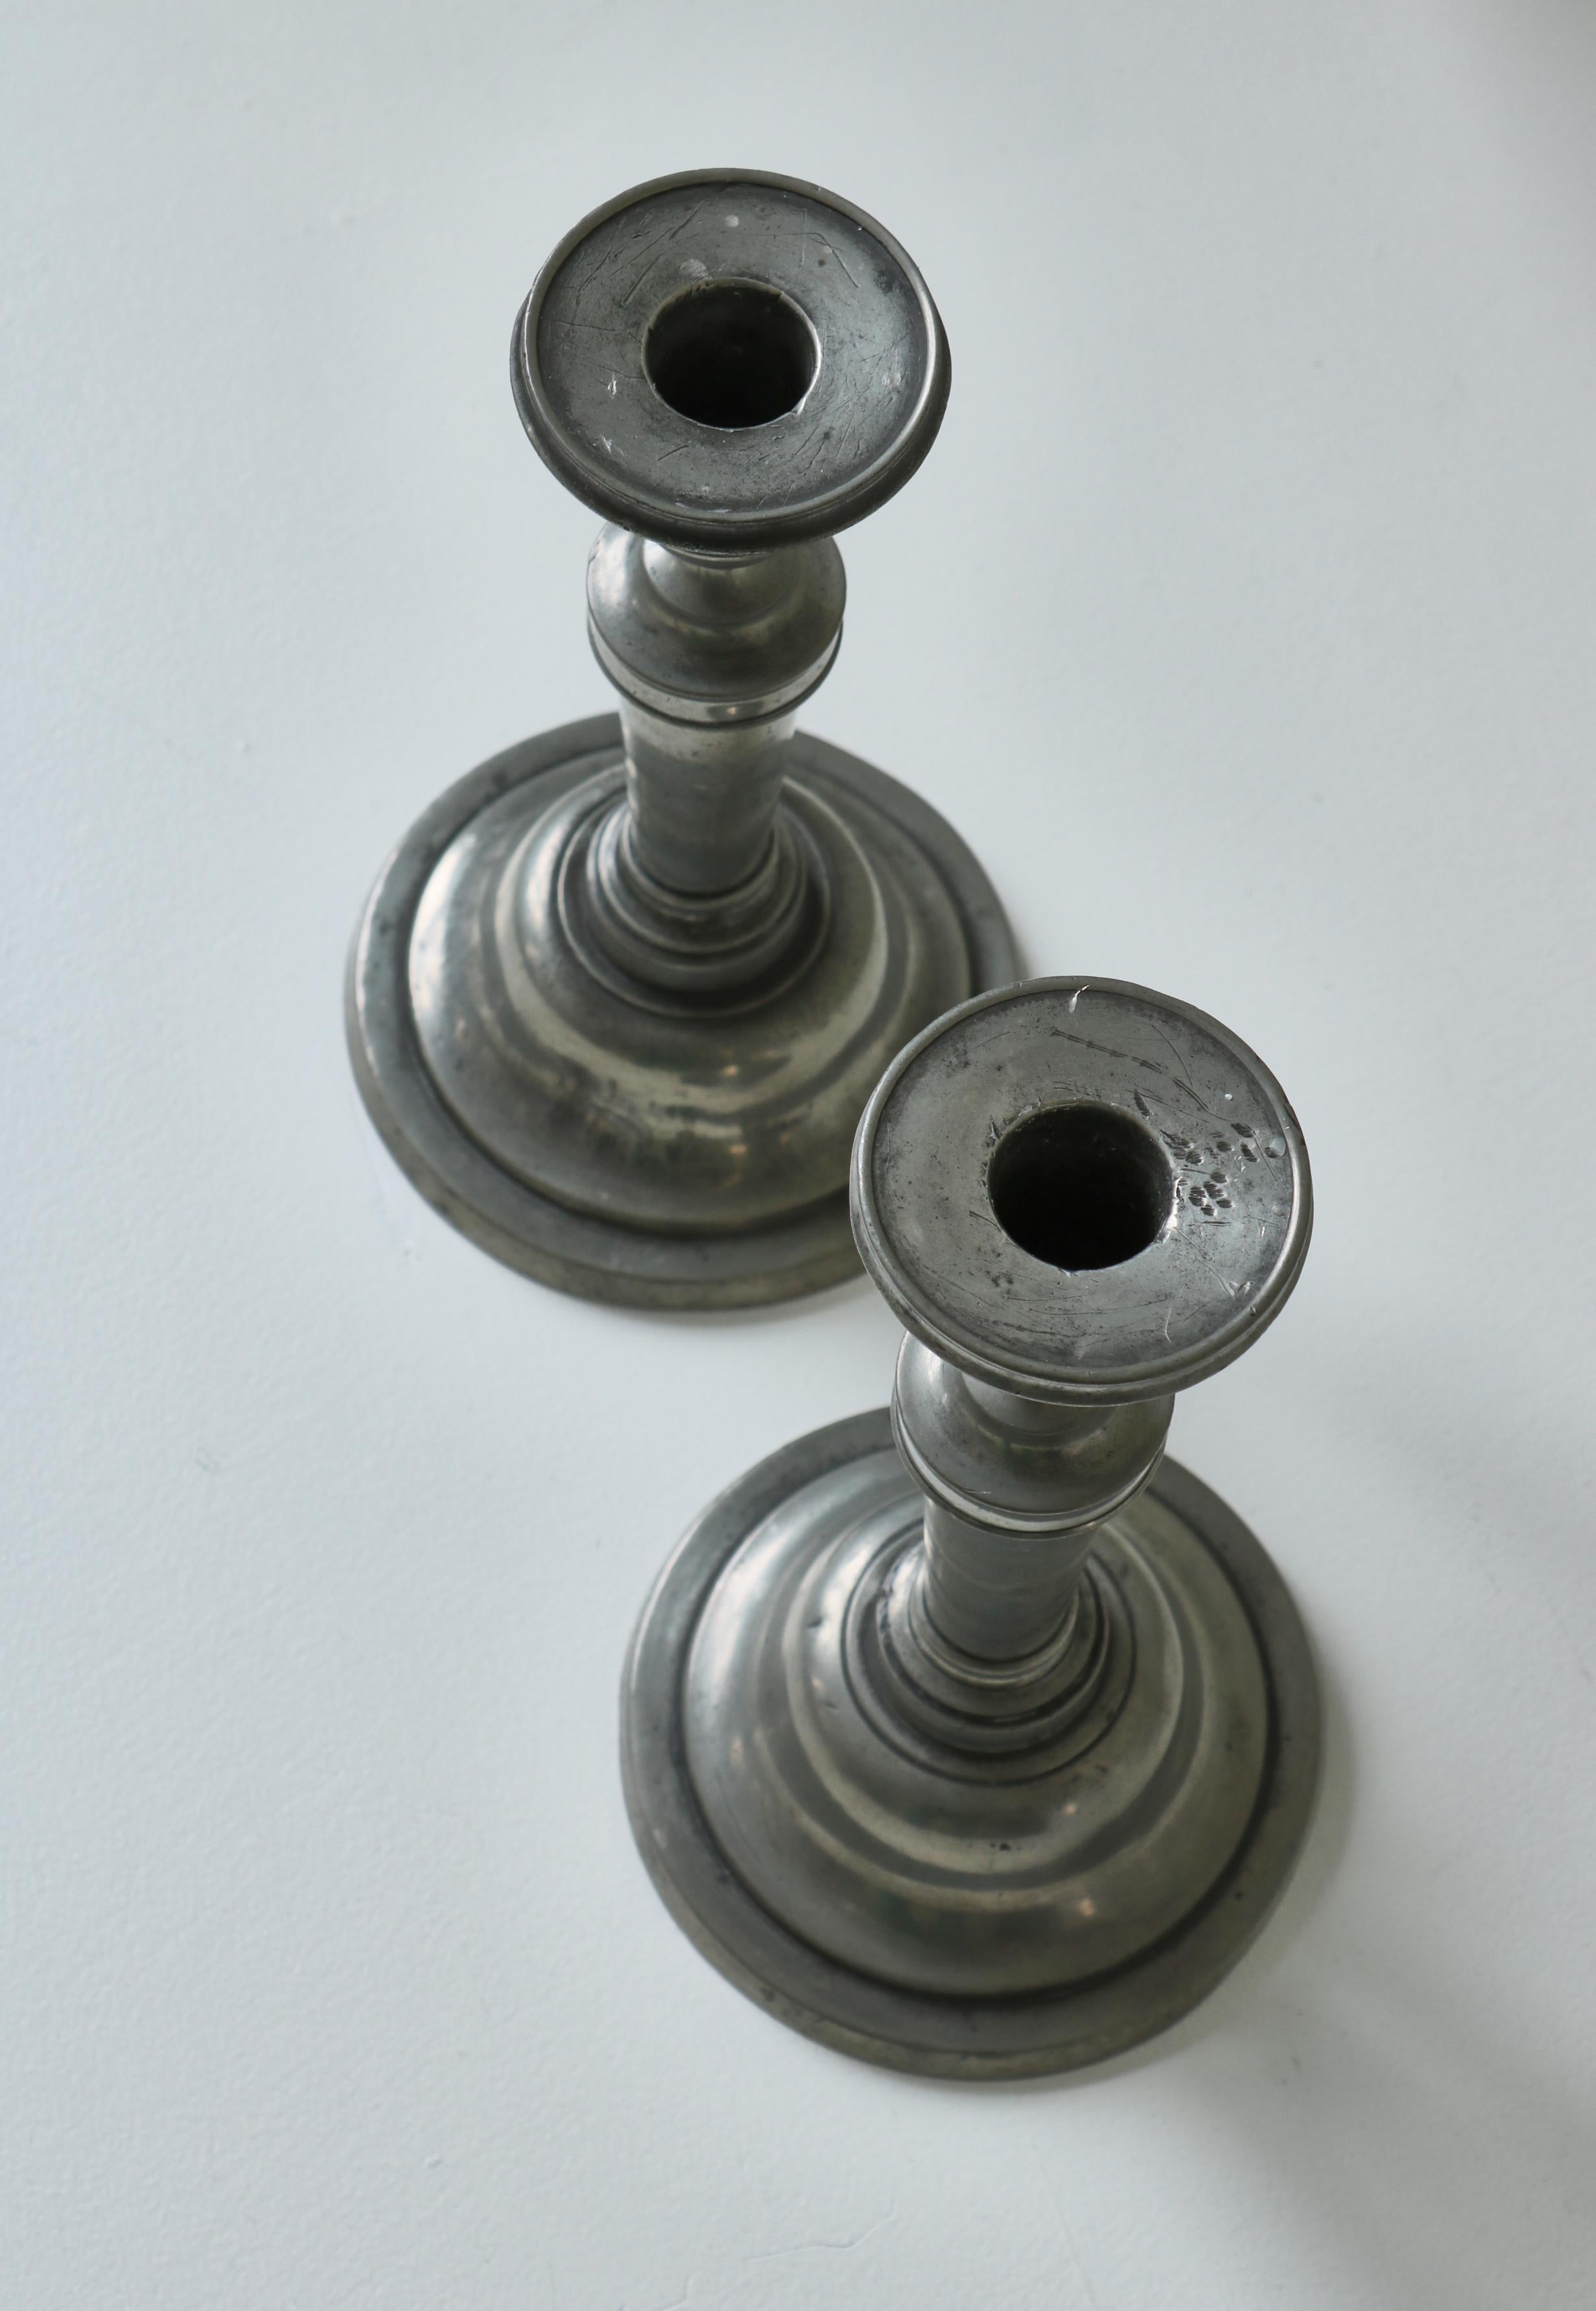 Danish Handmade Antique Empire Candle Holders in Pewter, Stamped, Denmark, 19th Century